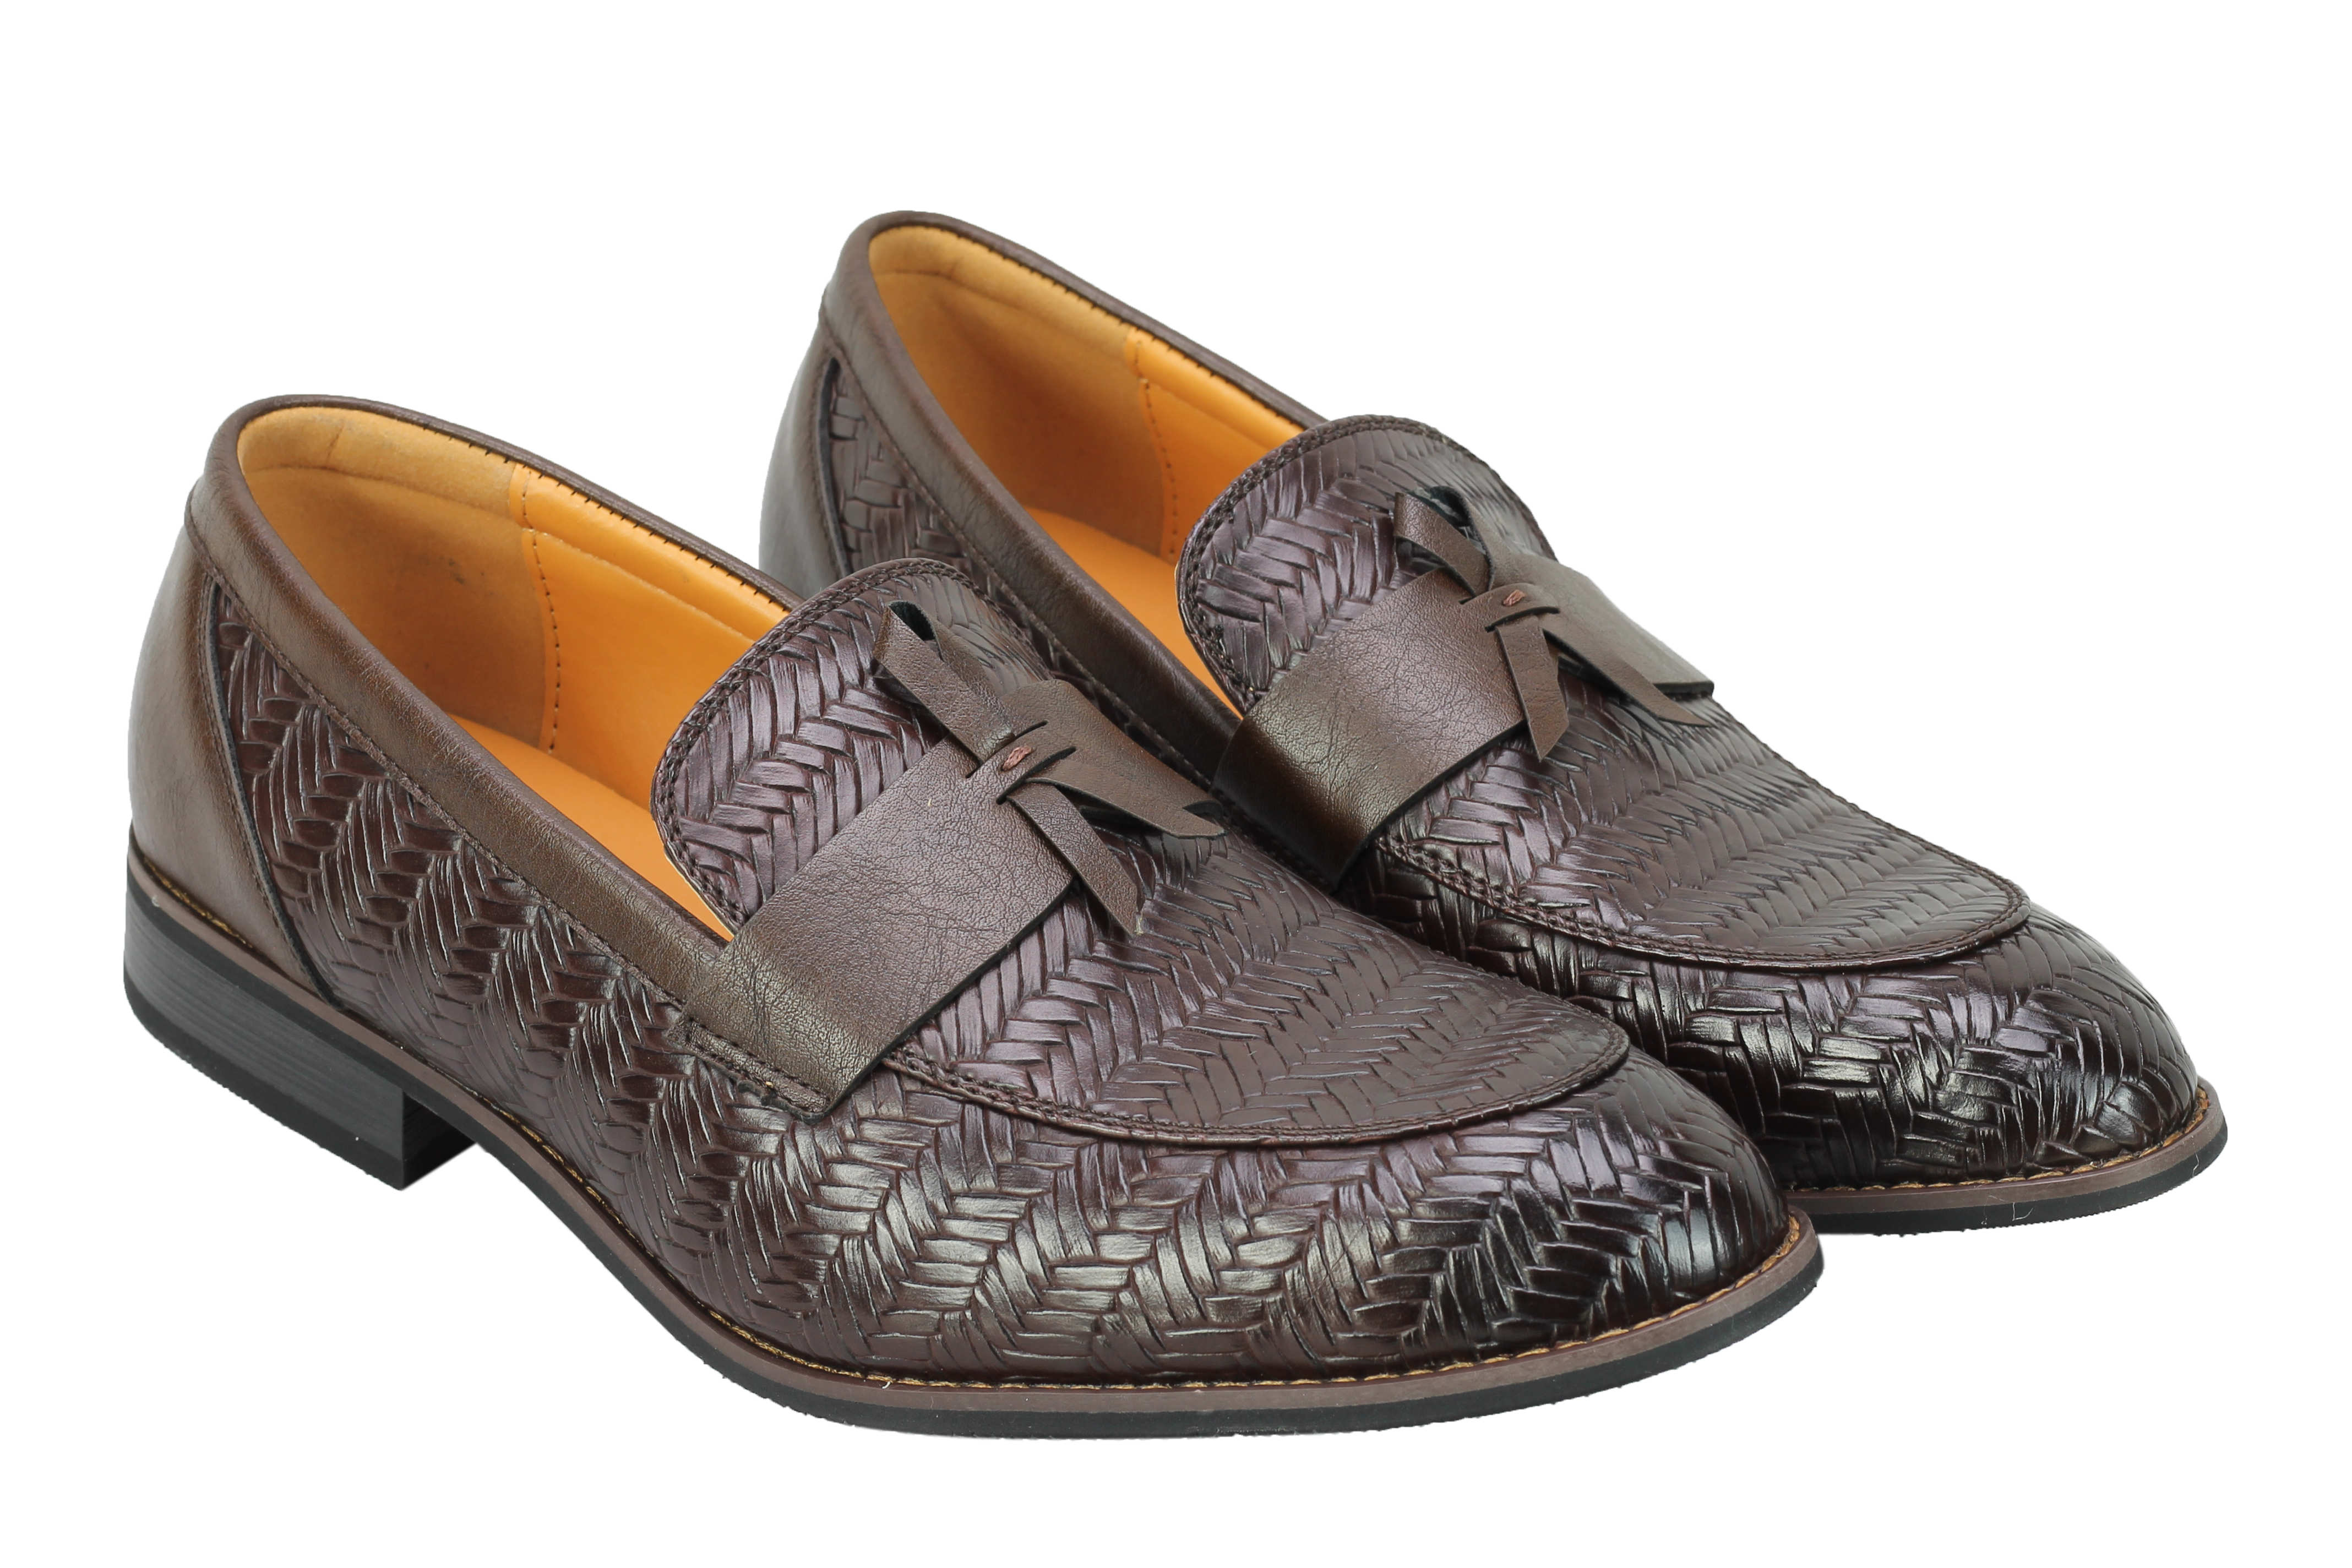 Mens Leather Lined Slip on Loafers Woven Patterned Smart Casual Retro ...